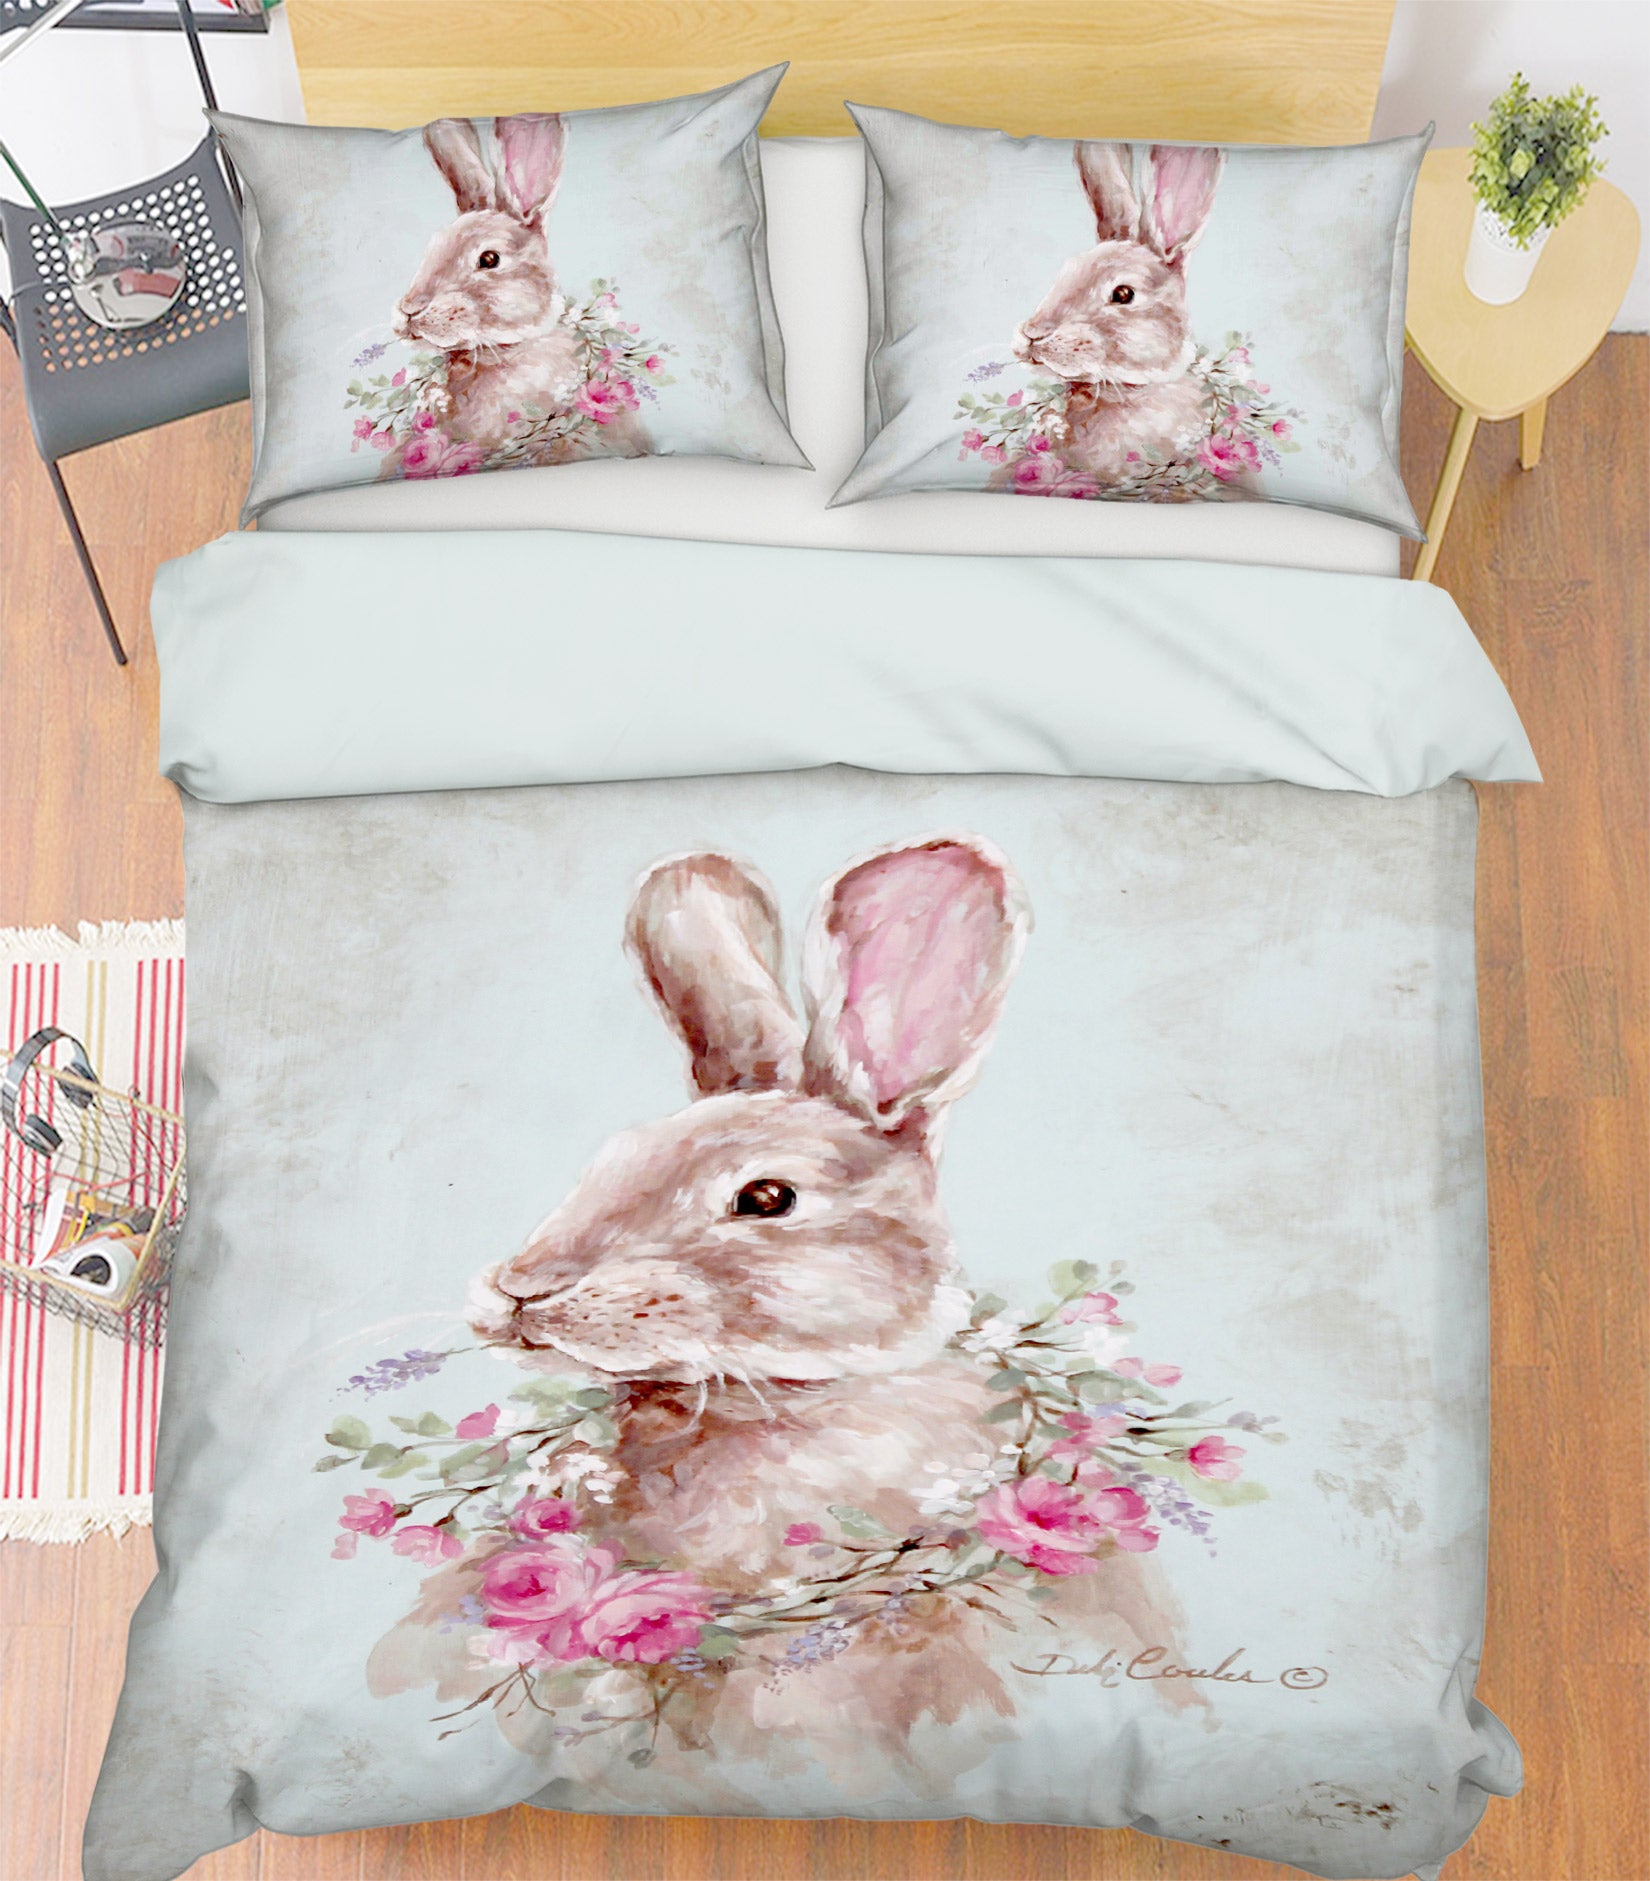 3D Wreath Bunny 2076 Debi Coules Bedding Bed Pillowcases Quilt